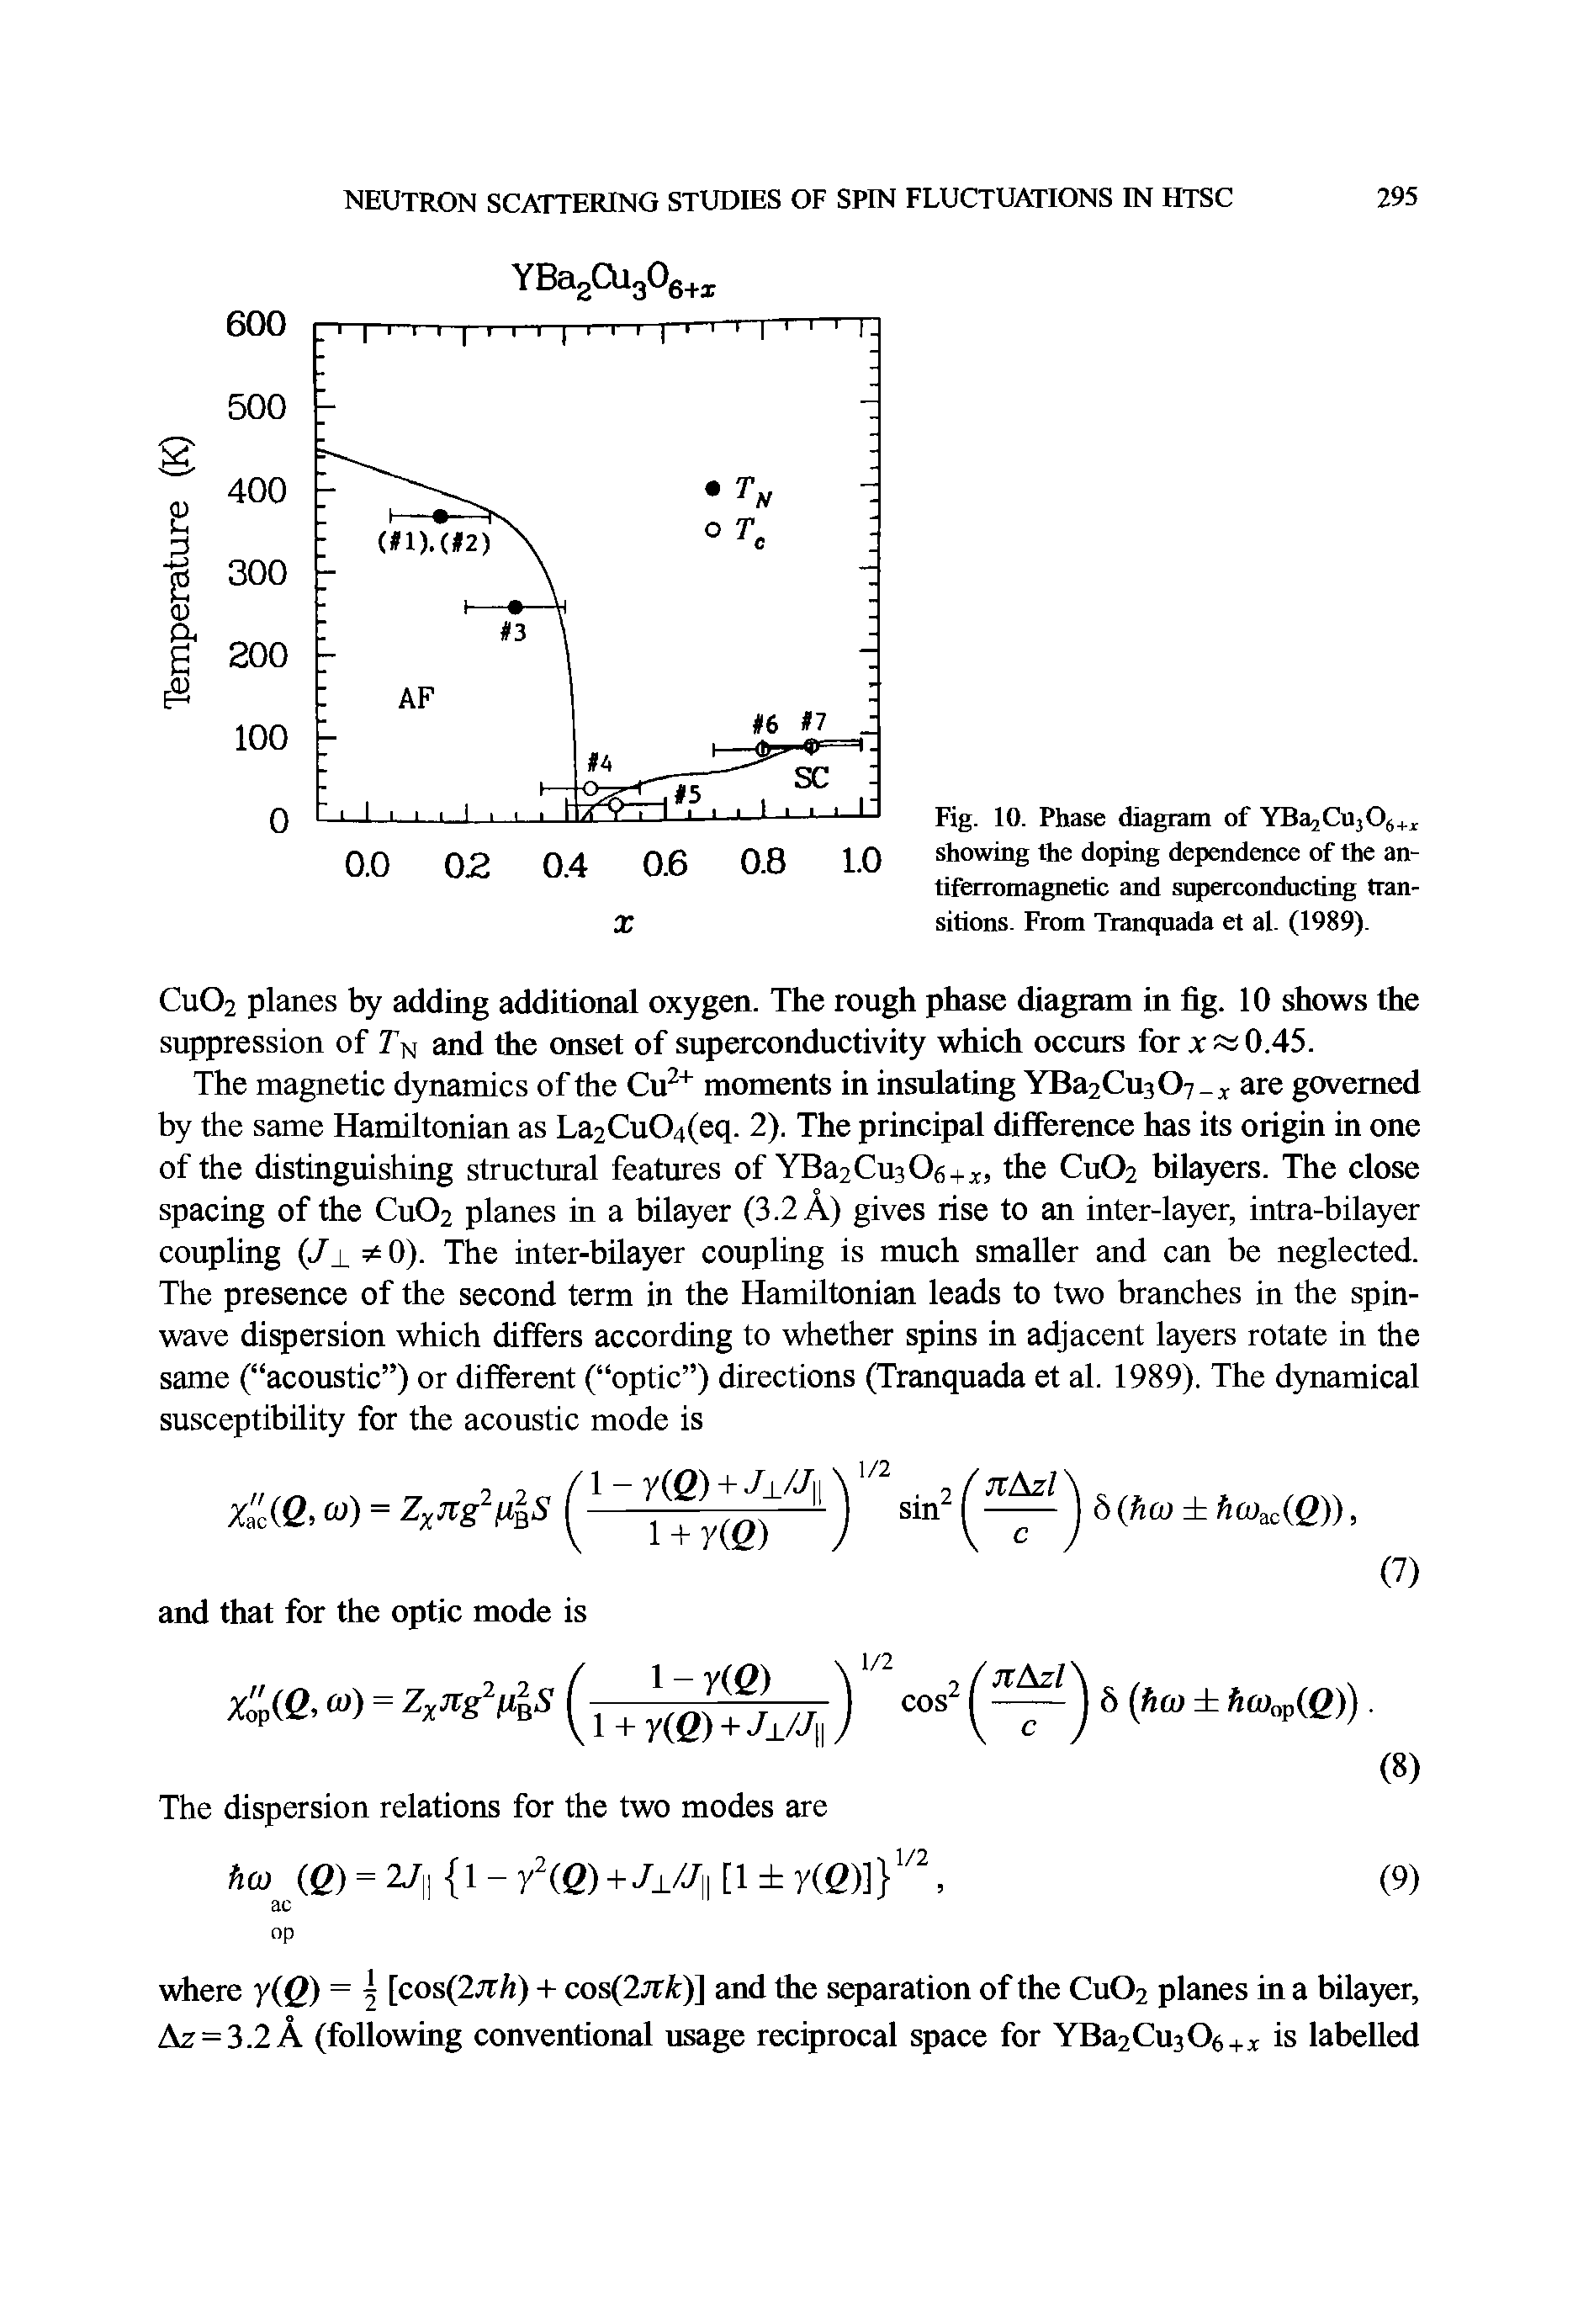 Fig. 10. Phase diagram of YBa2CUj05+ showing the doping dependence of the antiferromagnetic and superconducting transitions. From Tranquada et al. (1989).